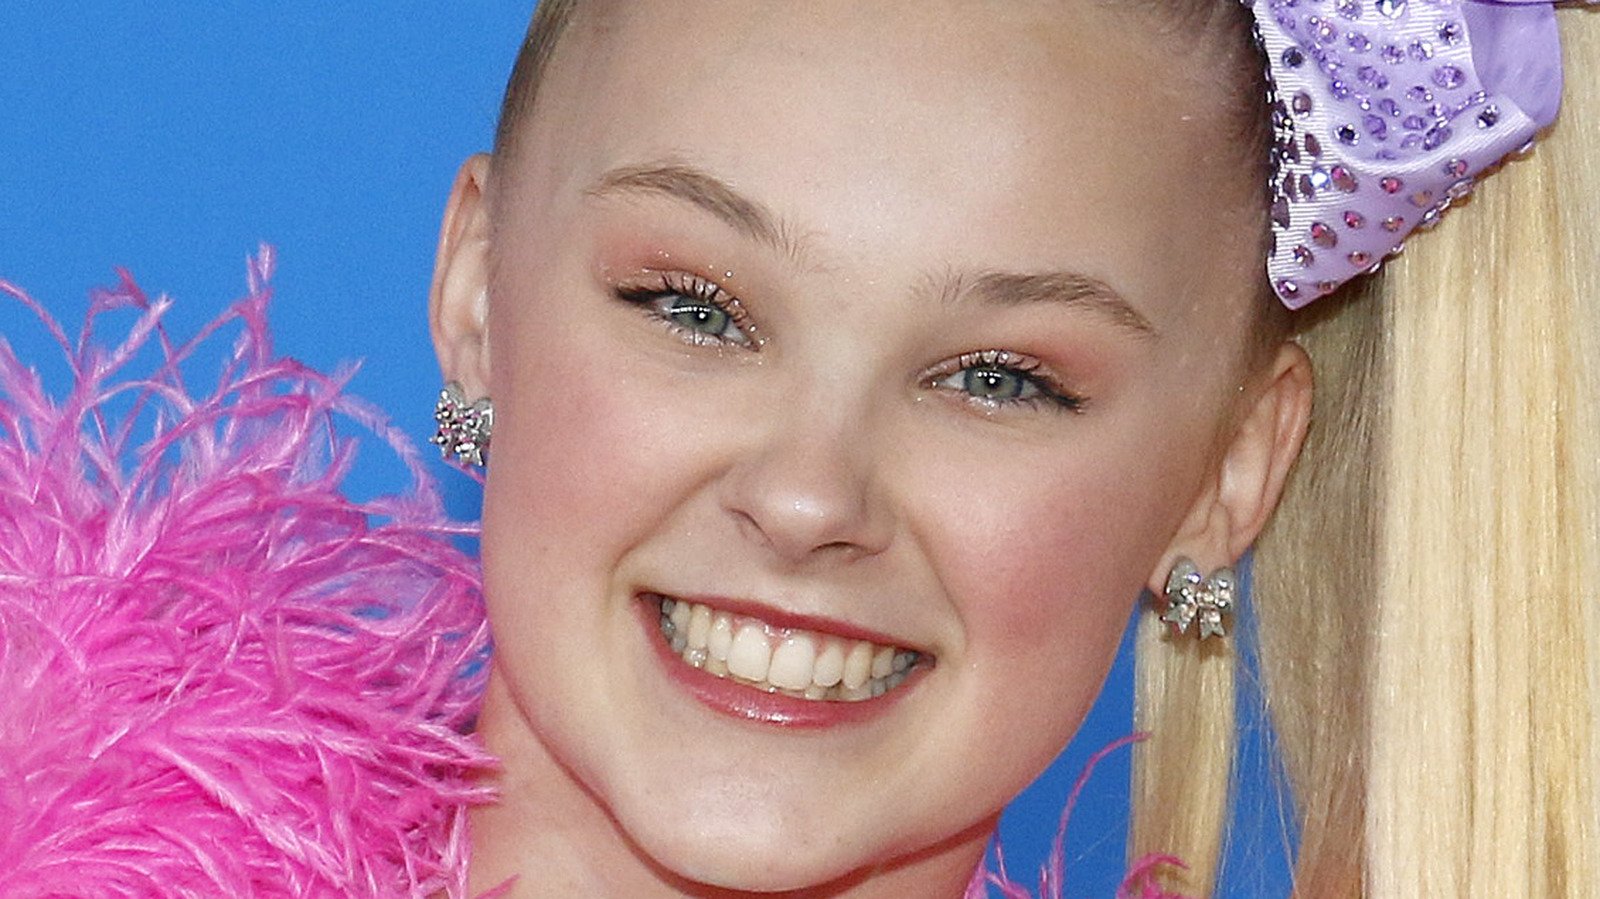 The One Thing JoJo Siwa Can't Agree On With Her Dance Moms Co-Stars